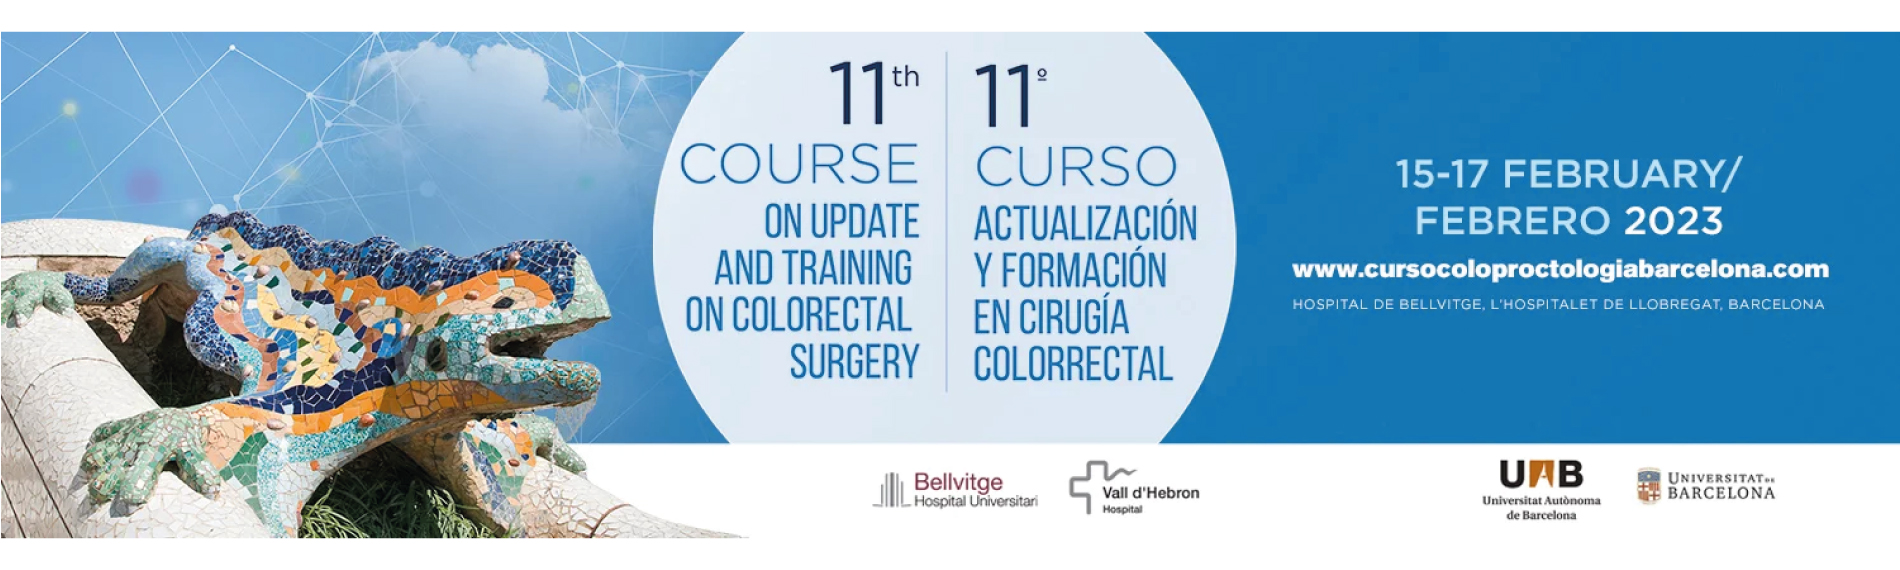 Course on Update and Training on Colorectal Surgery, 15-17 February 2023, Barcelona